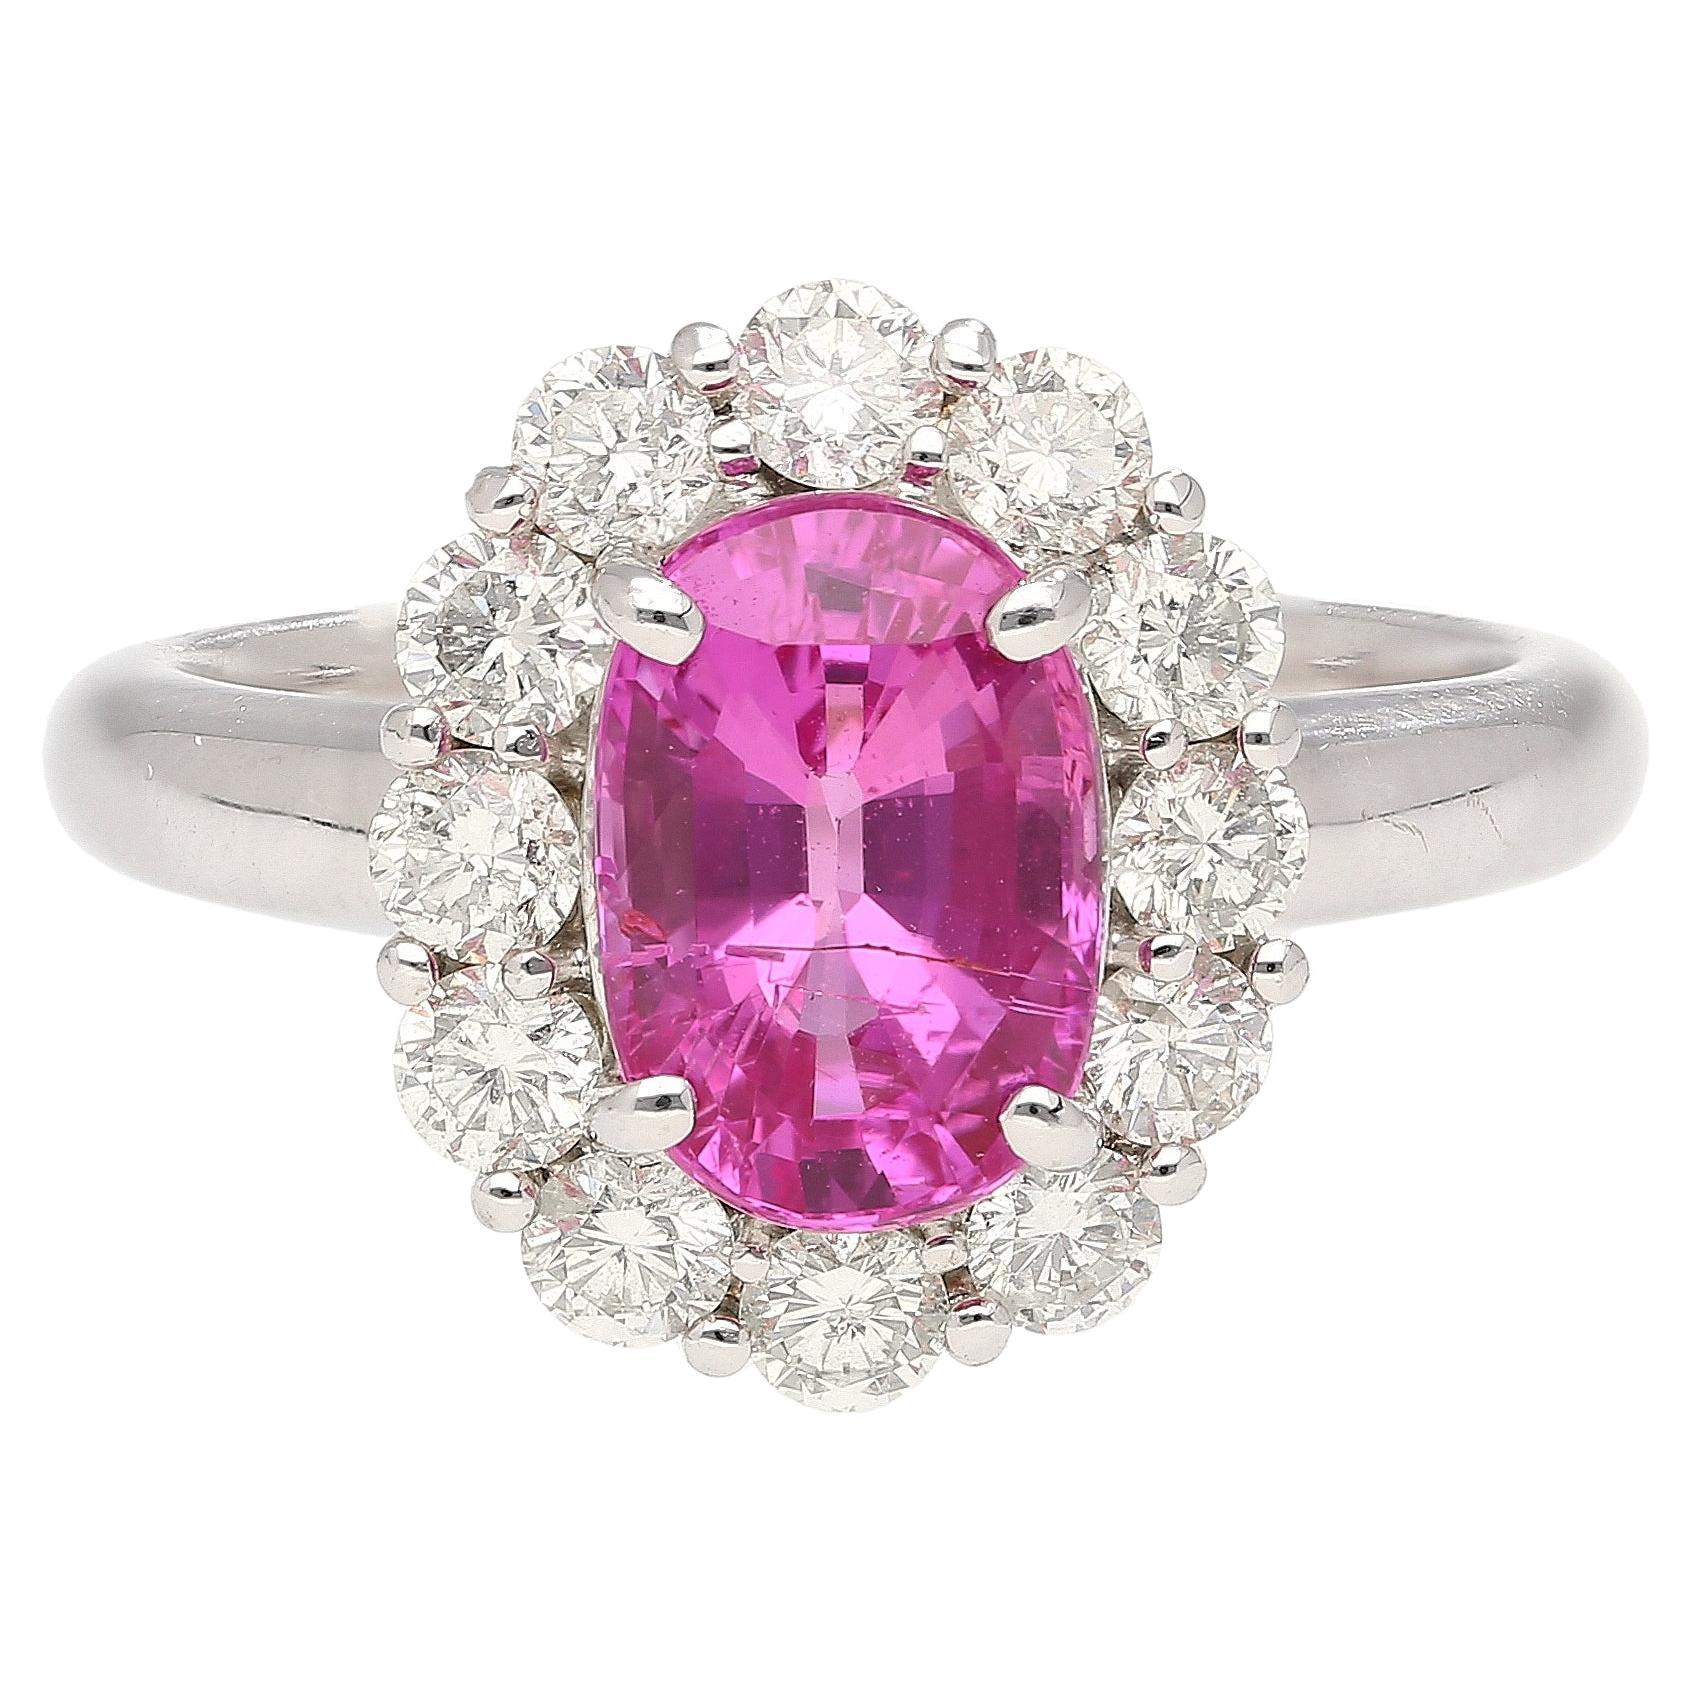 3.96 Carat Oval Cut Pink Sapphire and Diamond Halo Ring in 18k White Gold